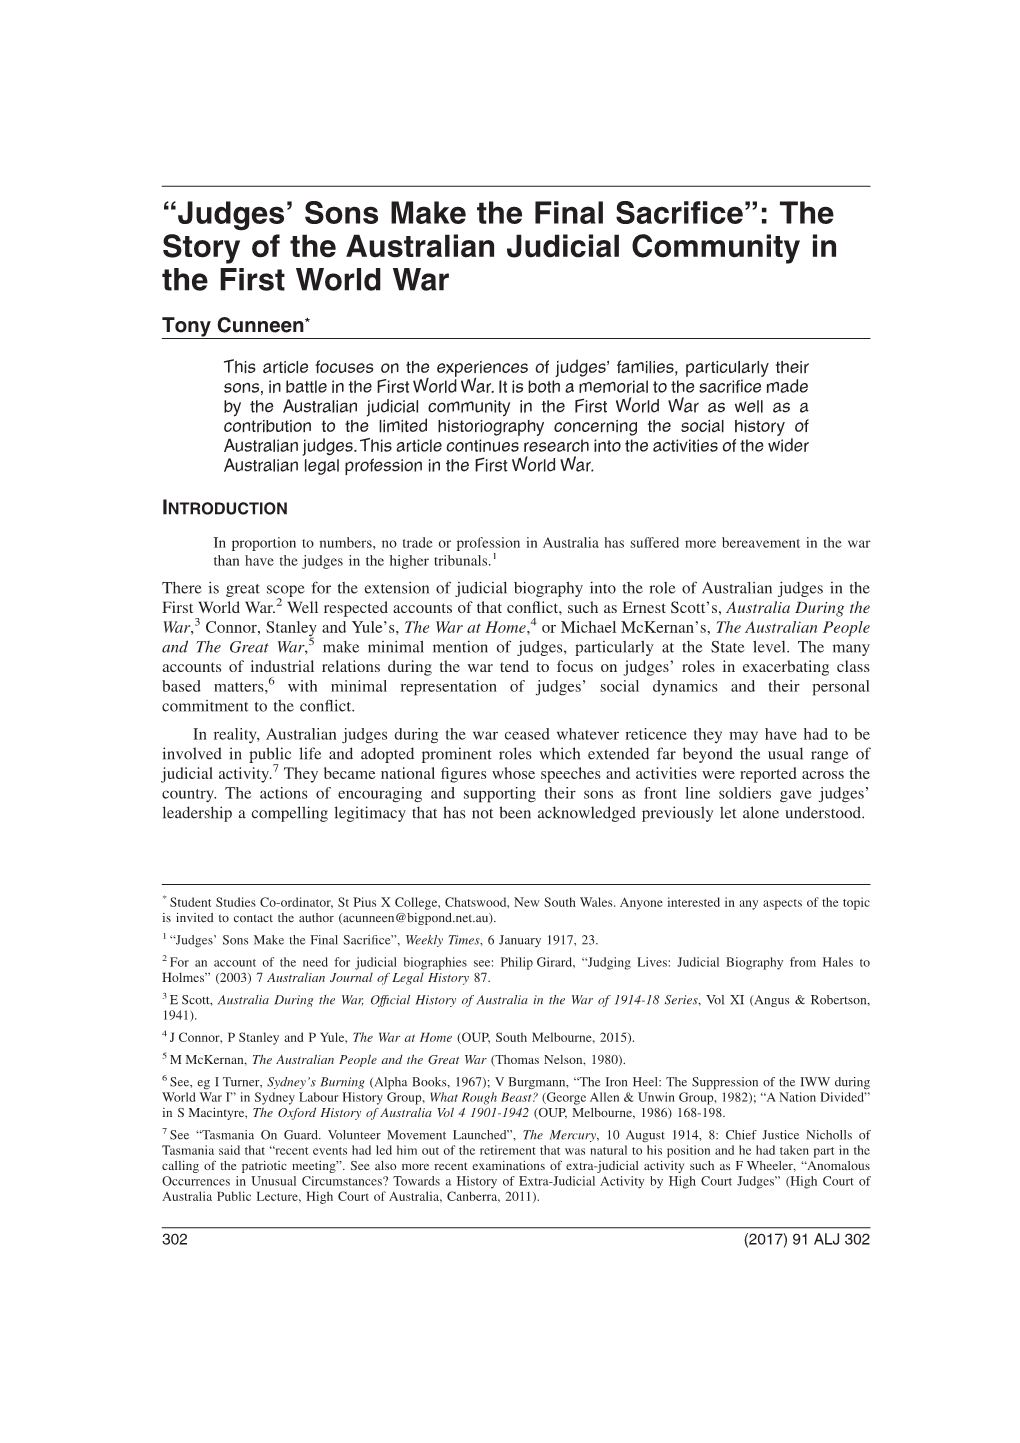 “Judges' Sons Make the Final Sacrifice”: the Story of the Australian Judicial Community in the First World